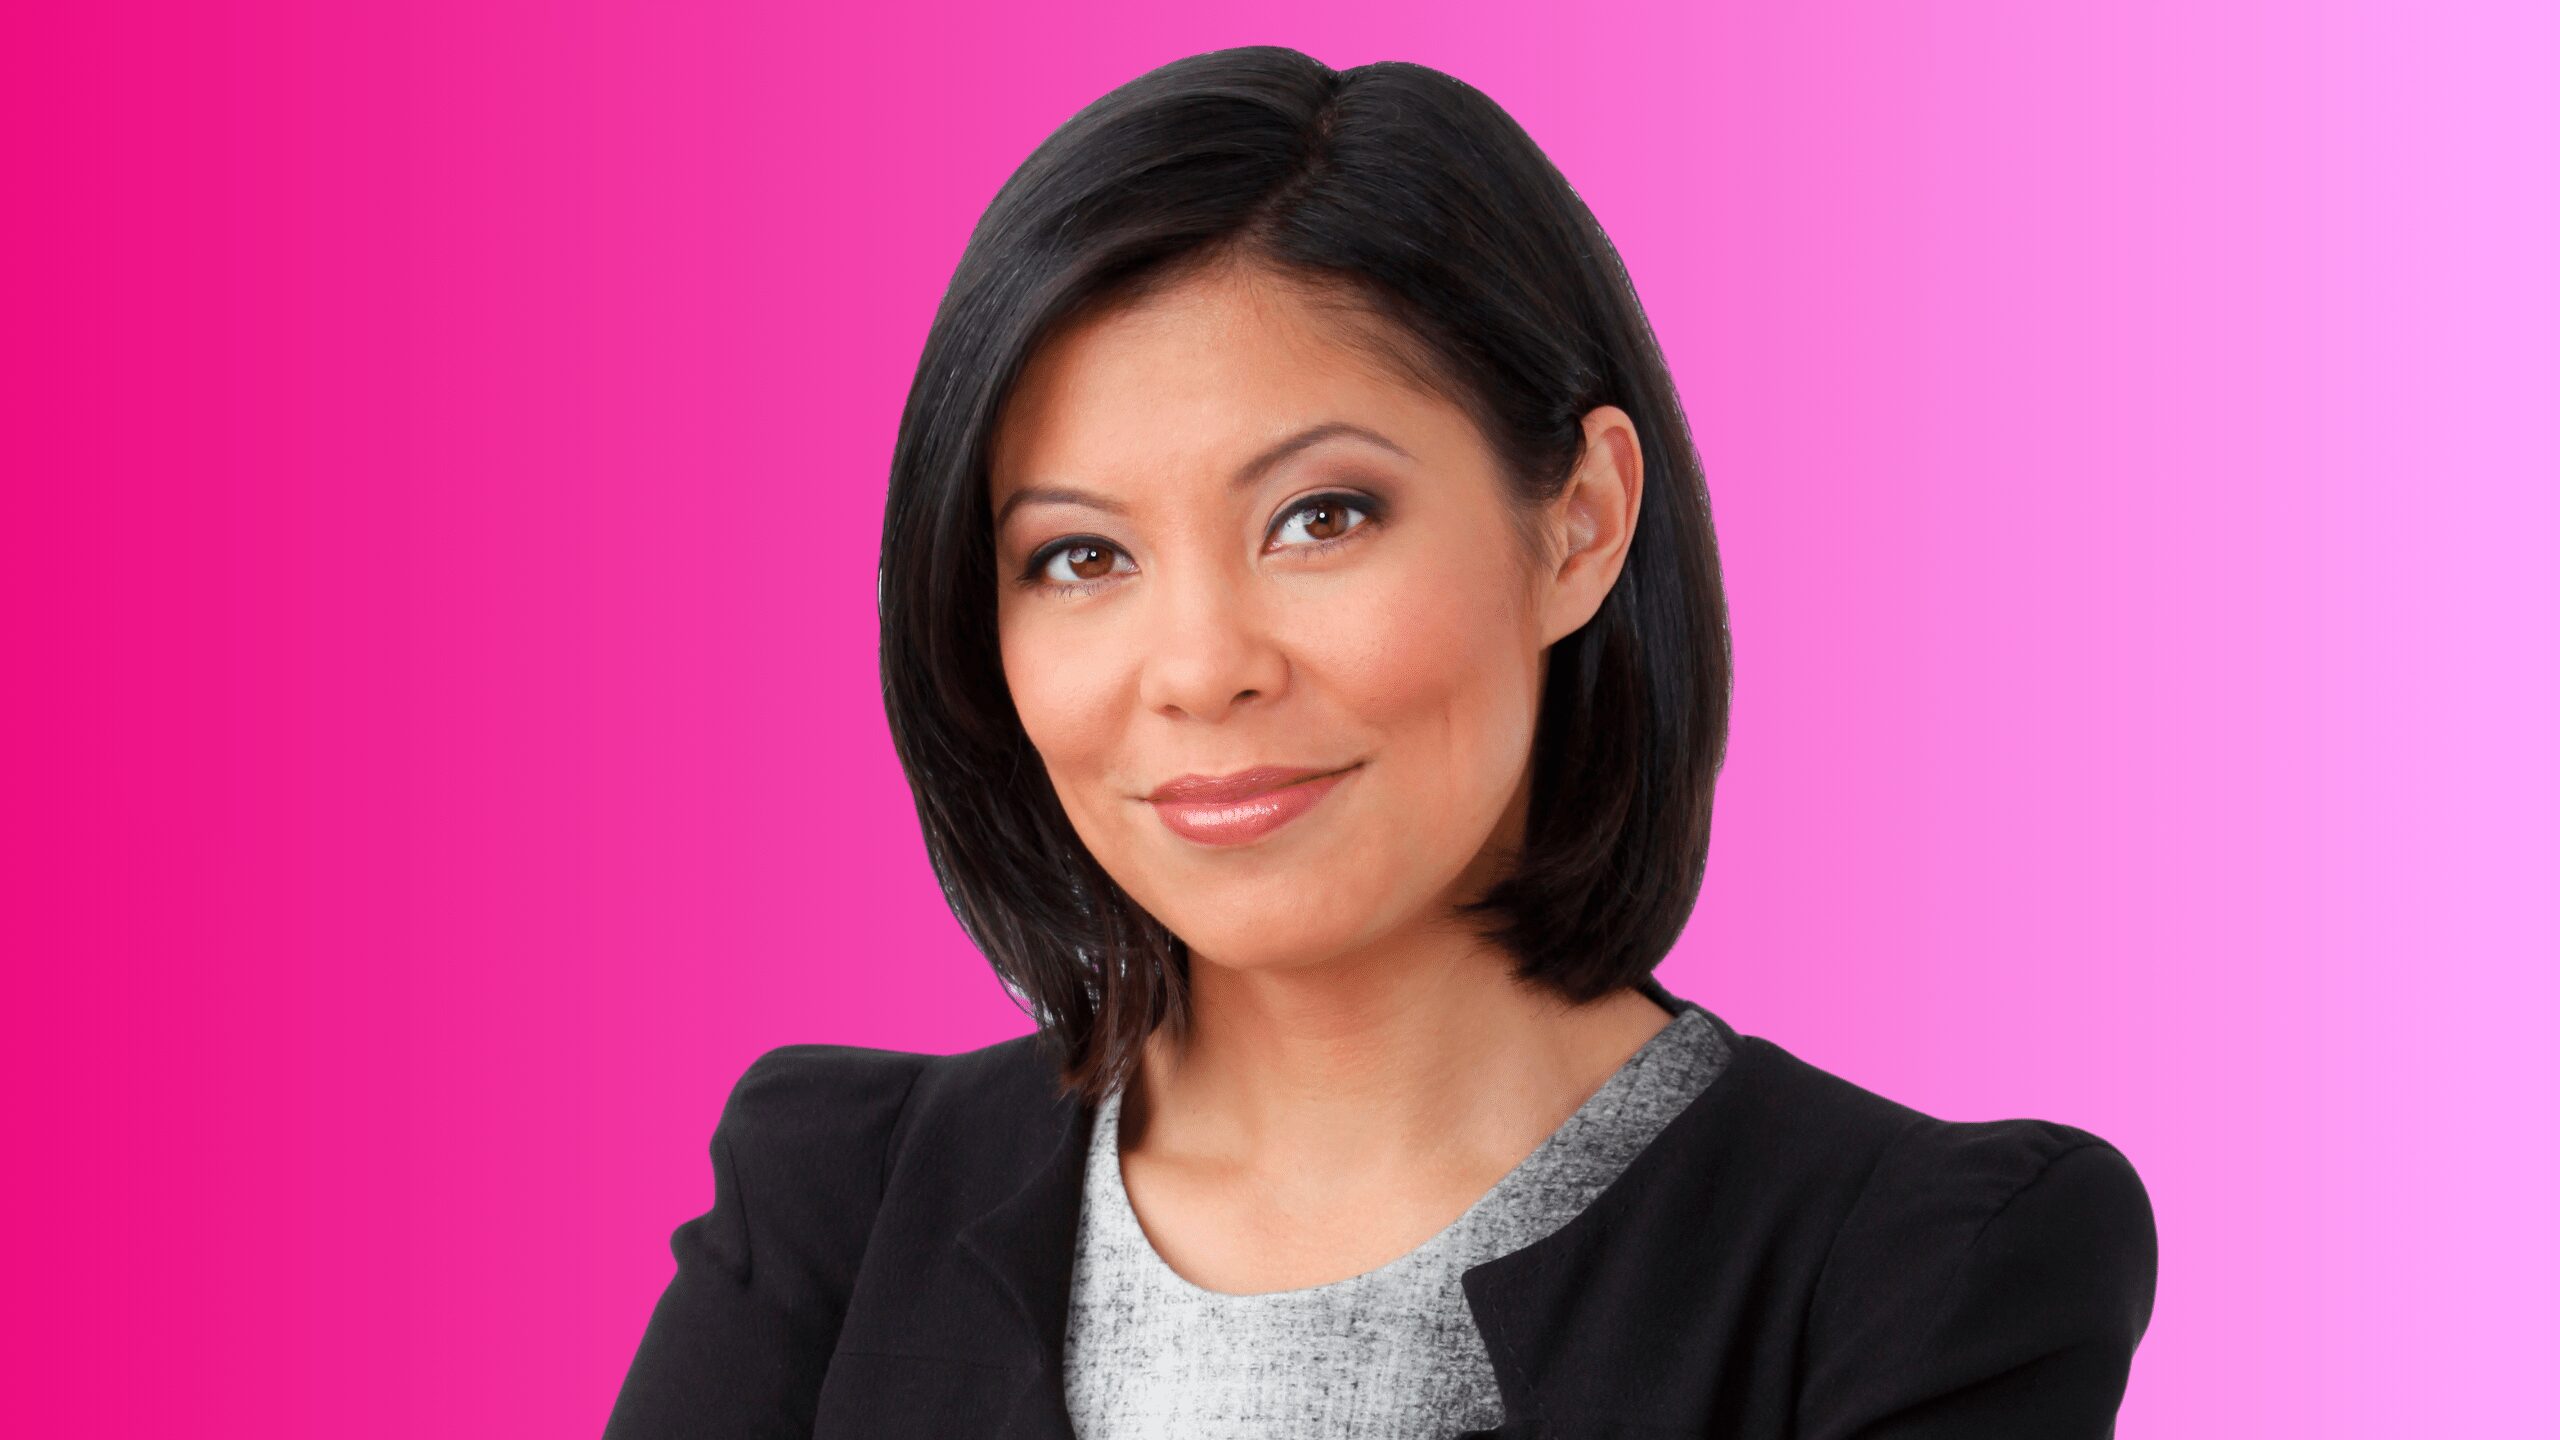 alex wagner height